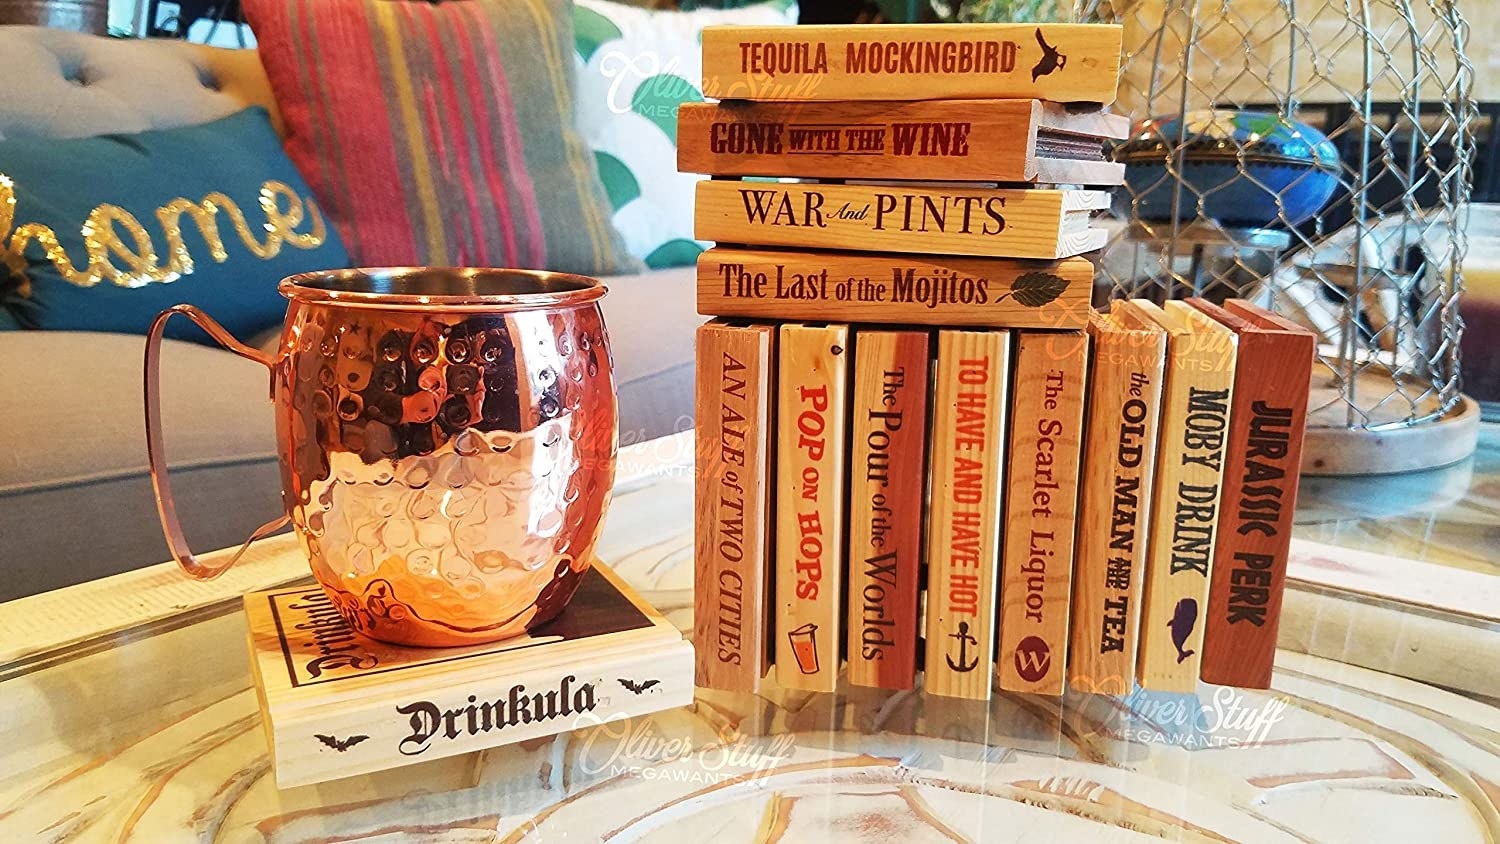 The set of coasters that looks like books but with titles like &quot;Drinkula&quot; and &quot;Gone with the Wine&quot;